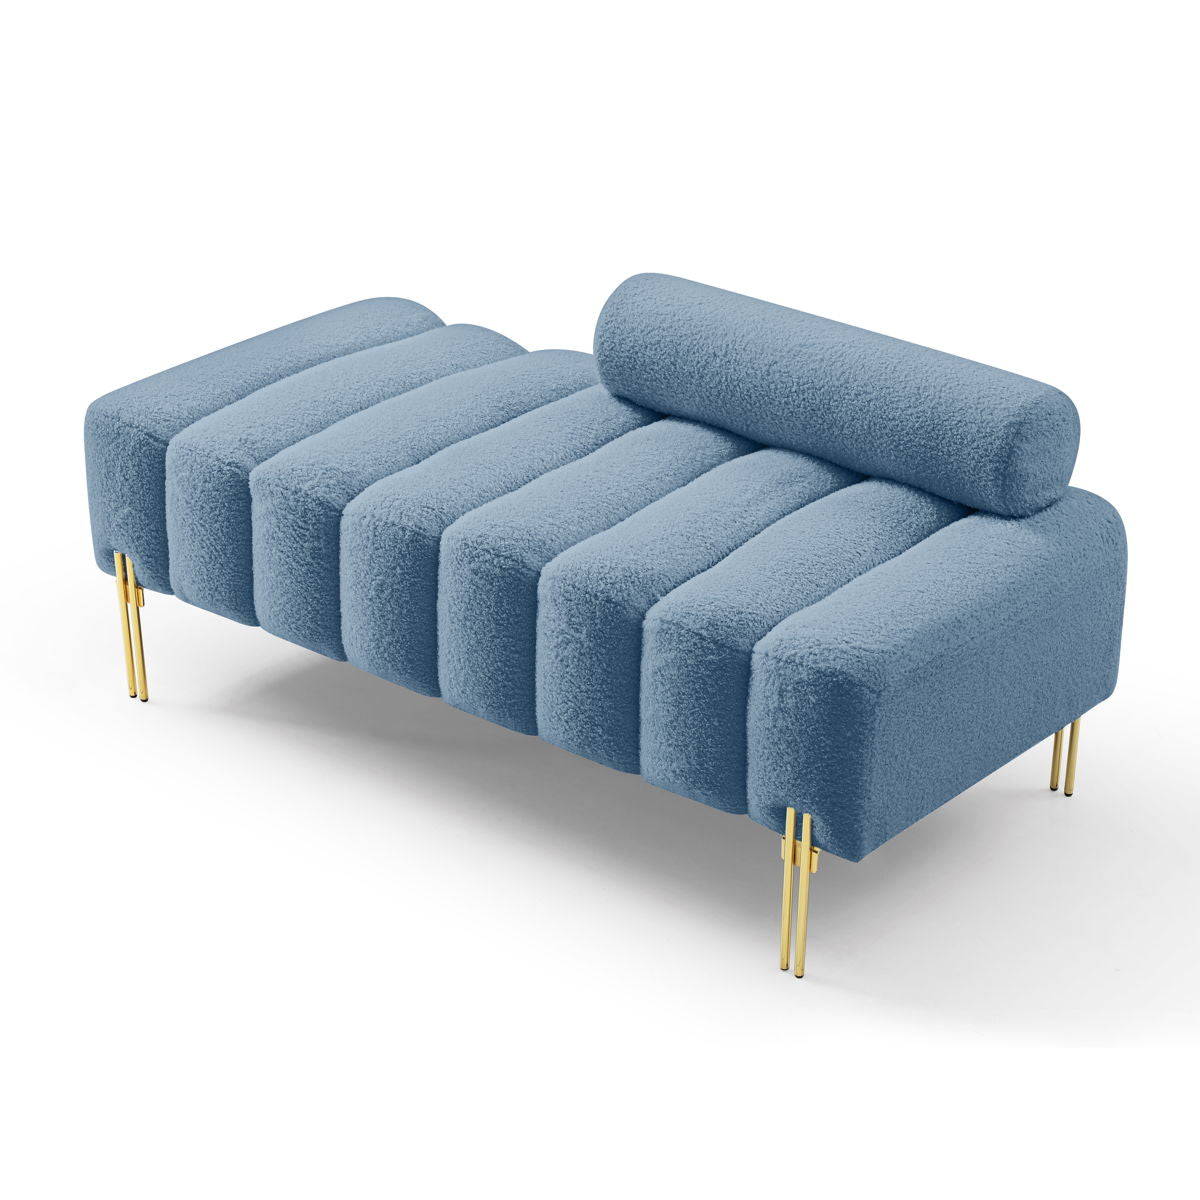 Width Modern End Of Bed Bench Sherpa Fabric Upholstered 2 Seater Sofa Couch Entryway Ottoman Bench Fuzzy Sofa Stool Footrest Window Bench With Gold Metal Legs For Bedroom Living Room, Light Blue